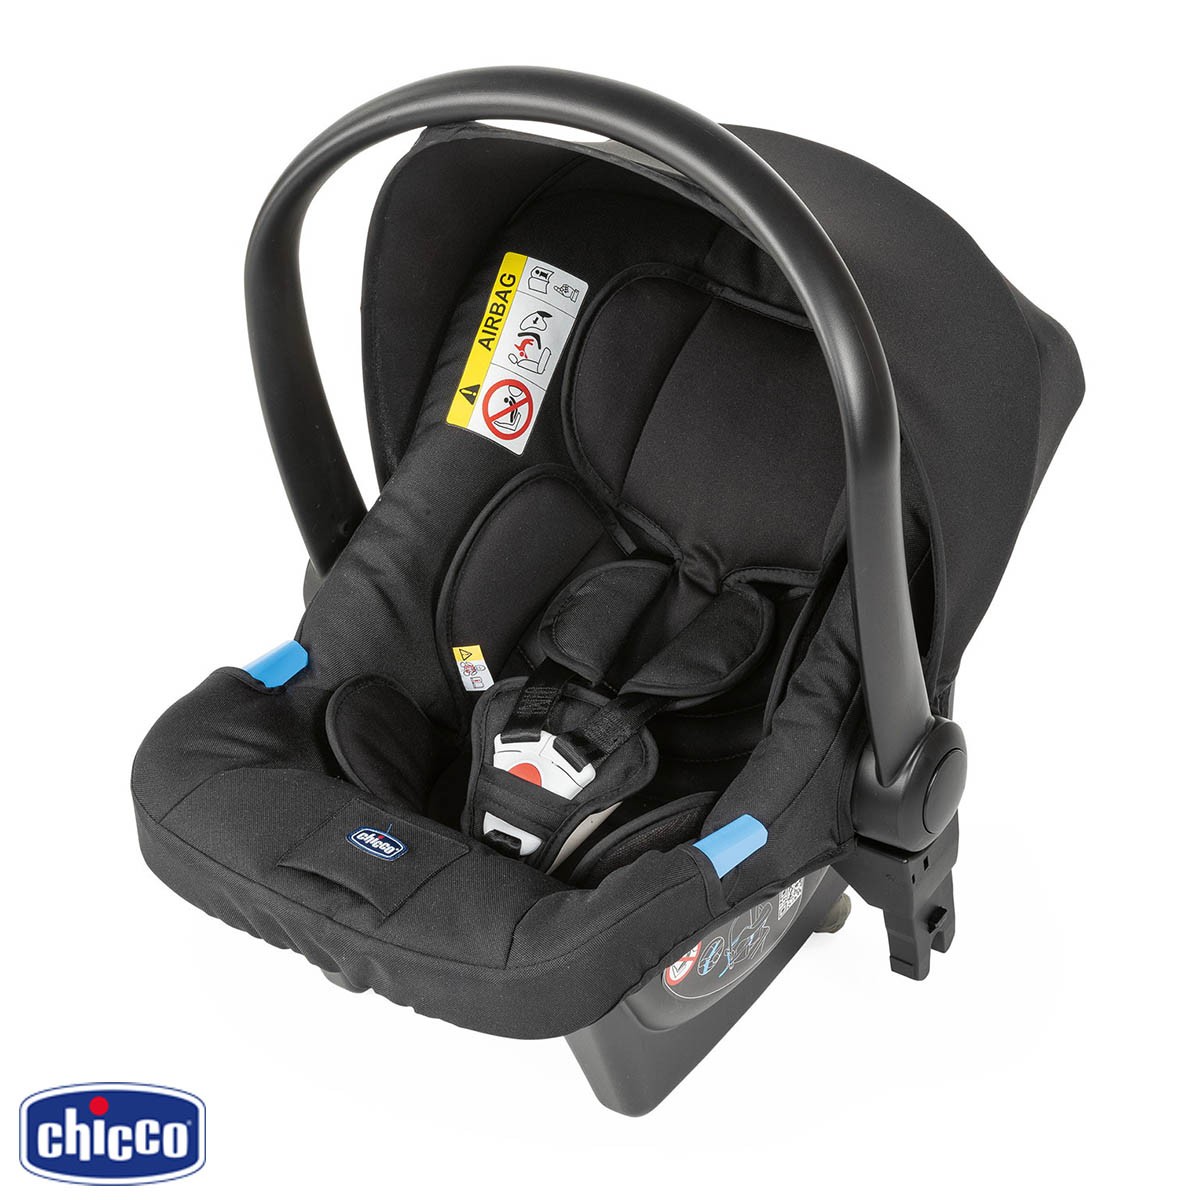 BUTAQUITA CHICCO KAILY | 0 A 13 KG - C/BASE